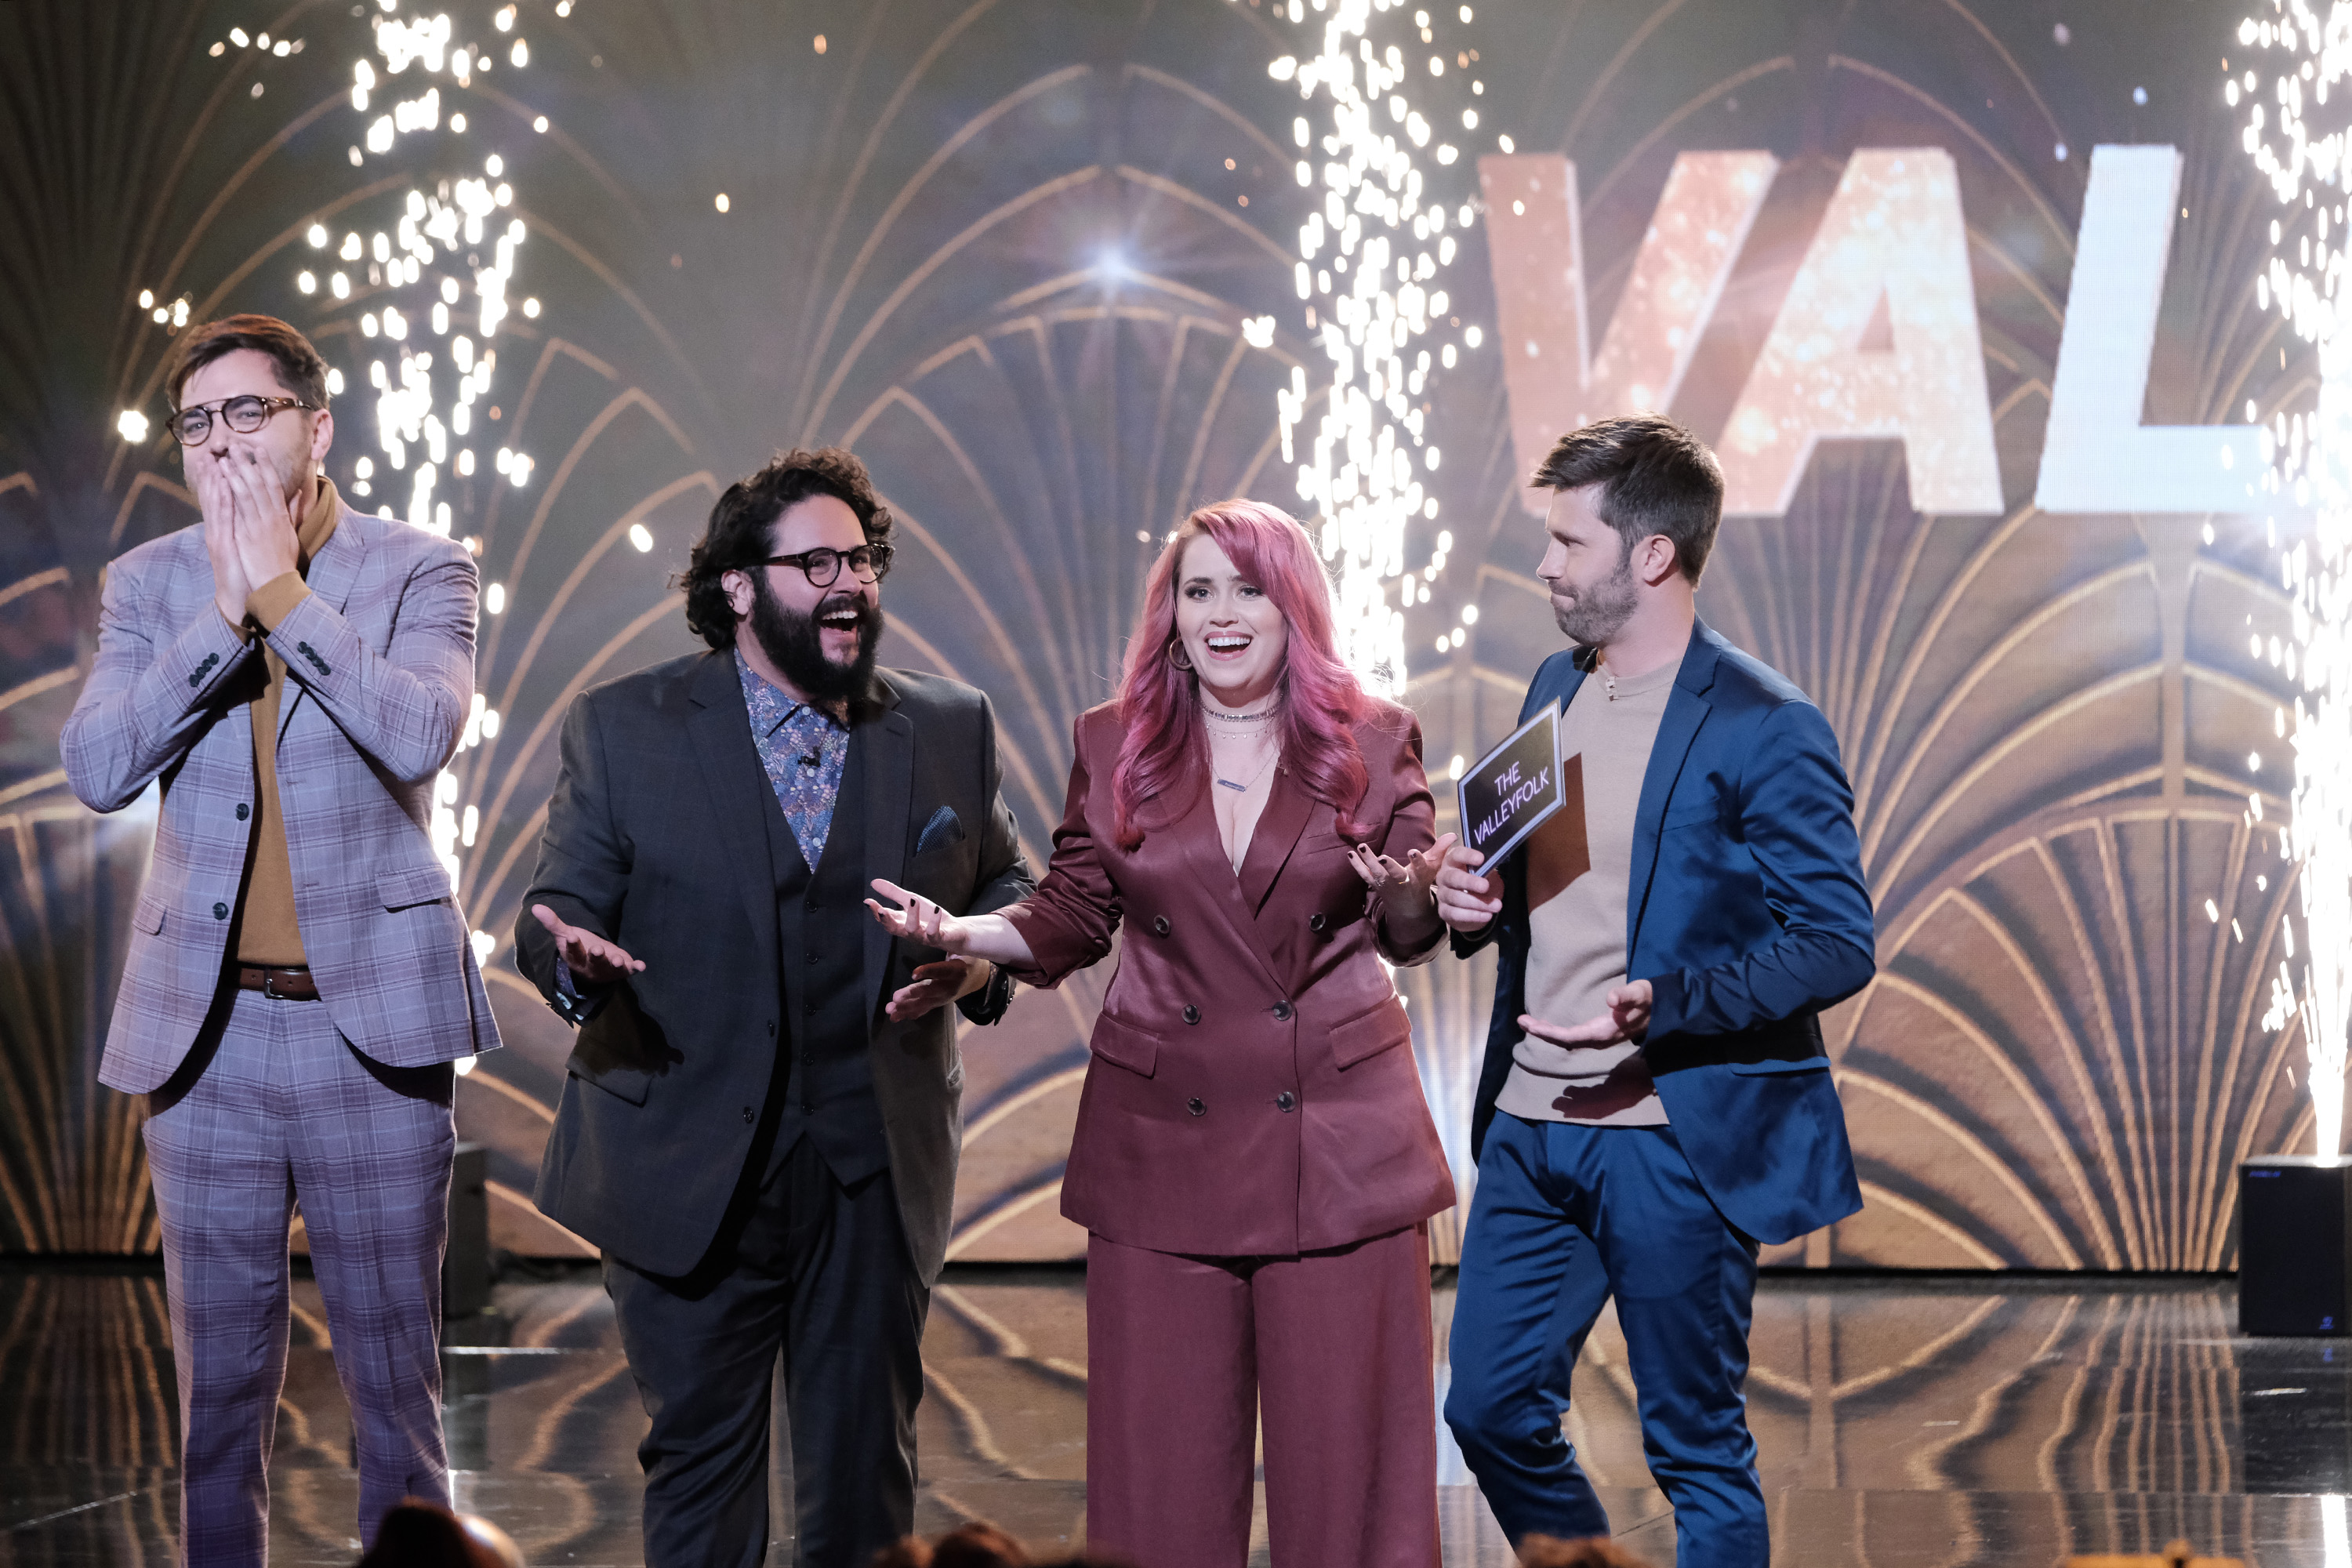 The Valleyfolk wins inaugural edition of Bring The Funny on NBC